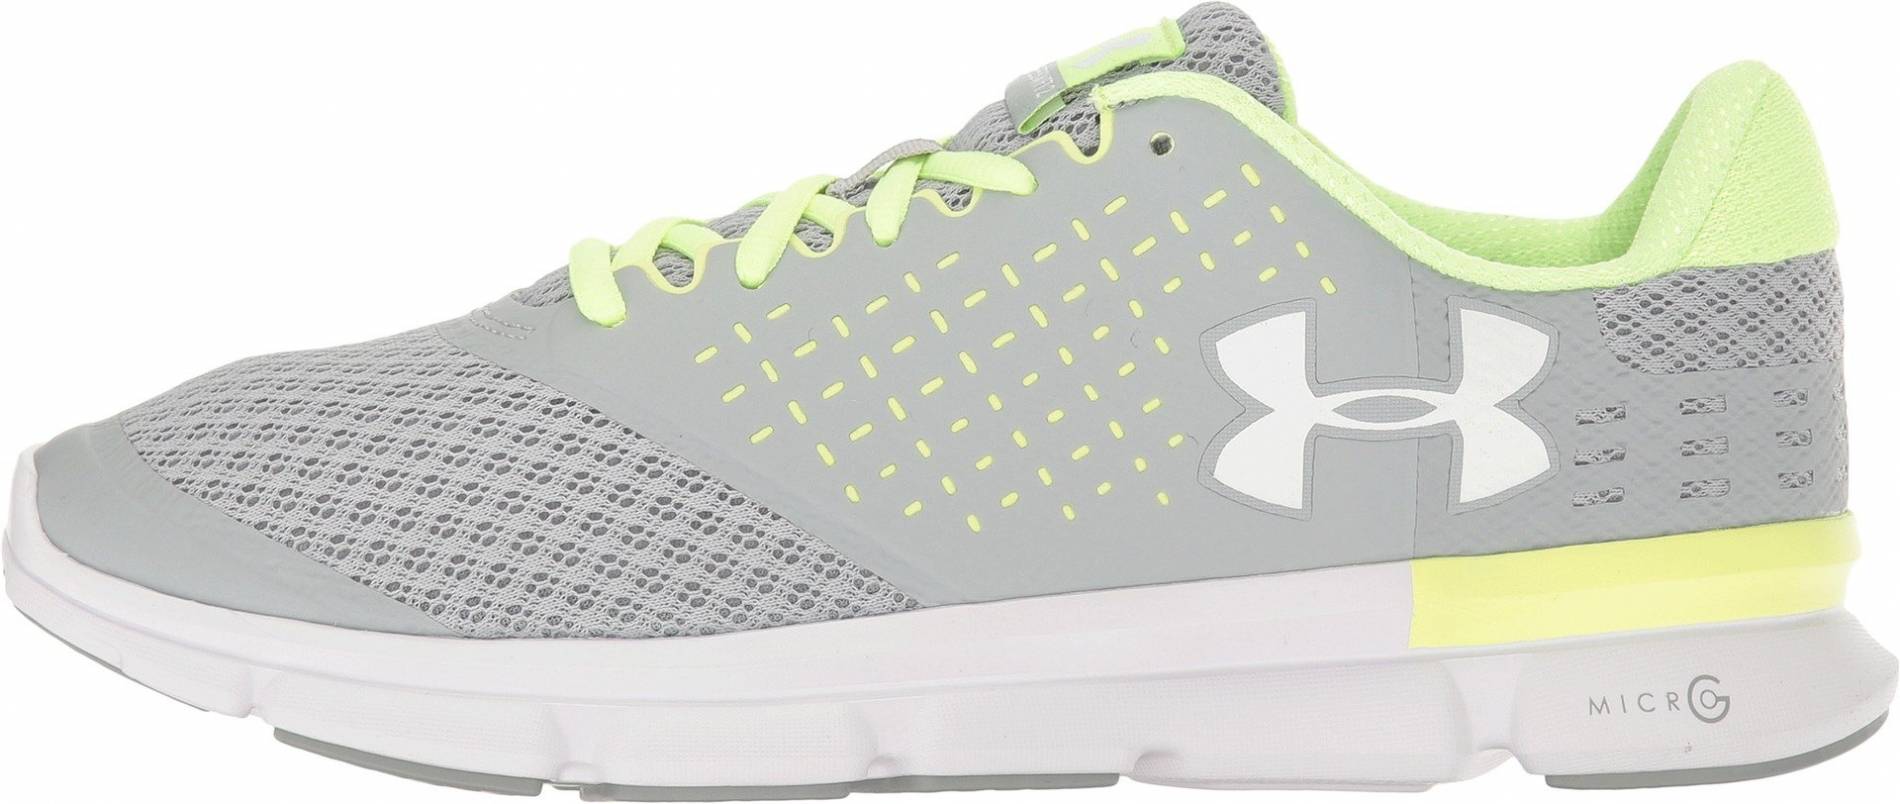 Under Armour Micro Speed Deals, SAVE